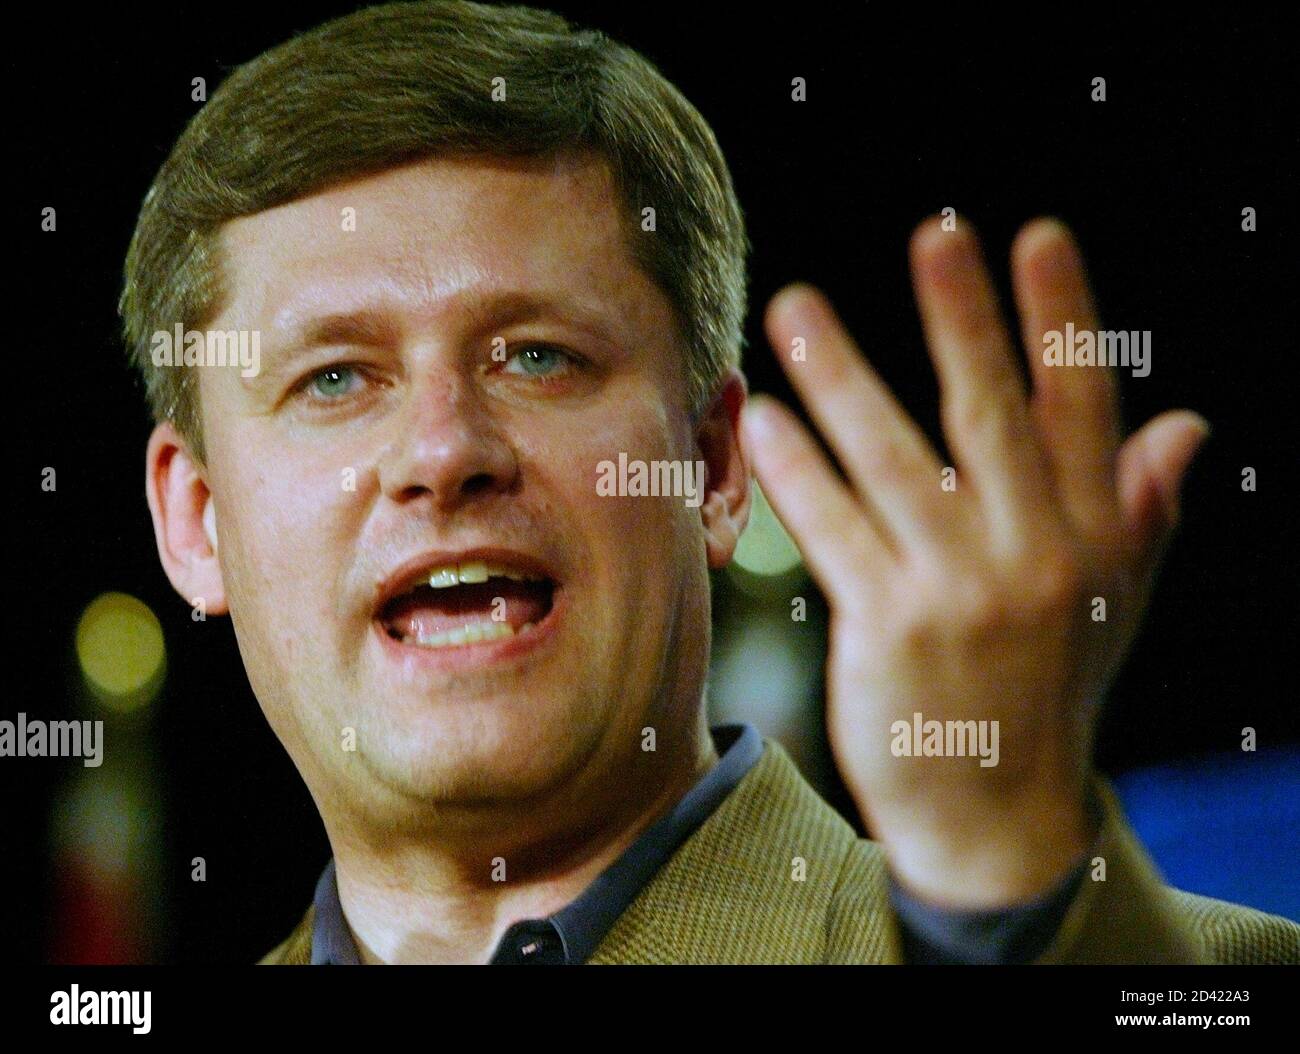 Conservative Party leader Stephen Harper addresses supporters during a campaign rally in Richmond, British Columbia May 29, 2004. Harper made a quick campaign stop in the lower mainland of British Columbia before returning to Ottawa. REUTERS/Andy Clark  AC Stock Photo